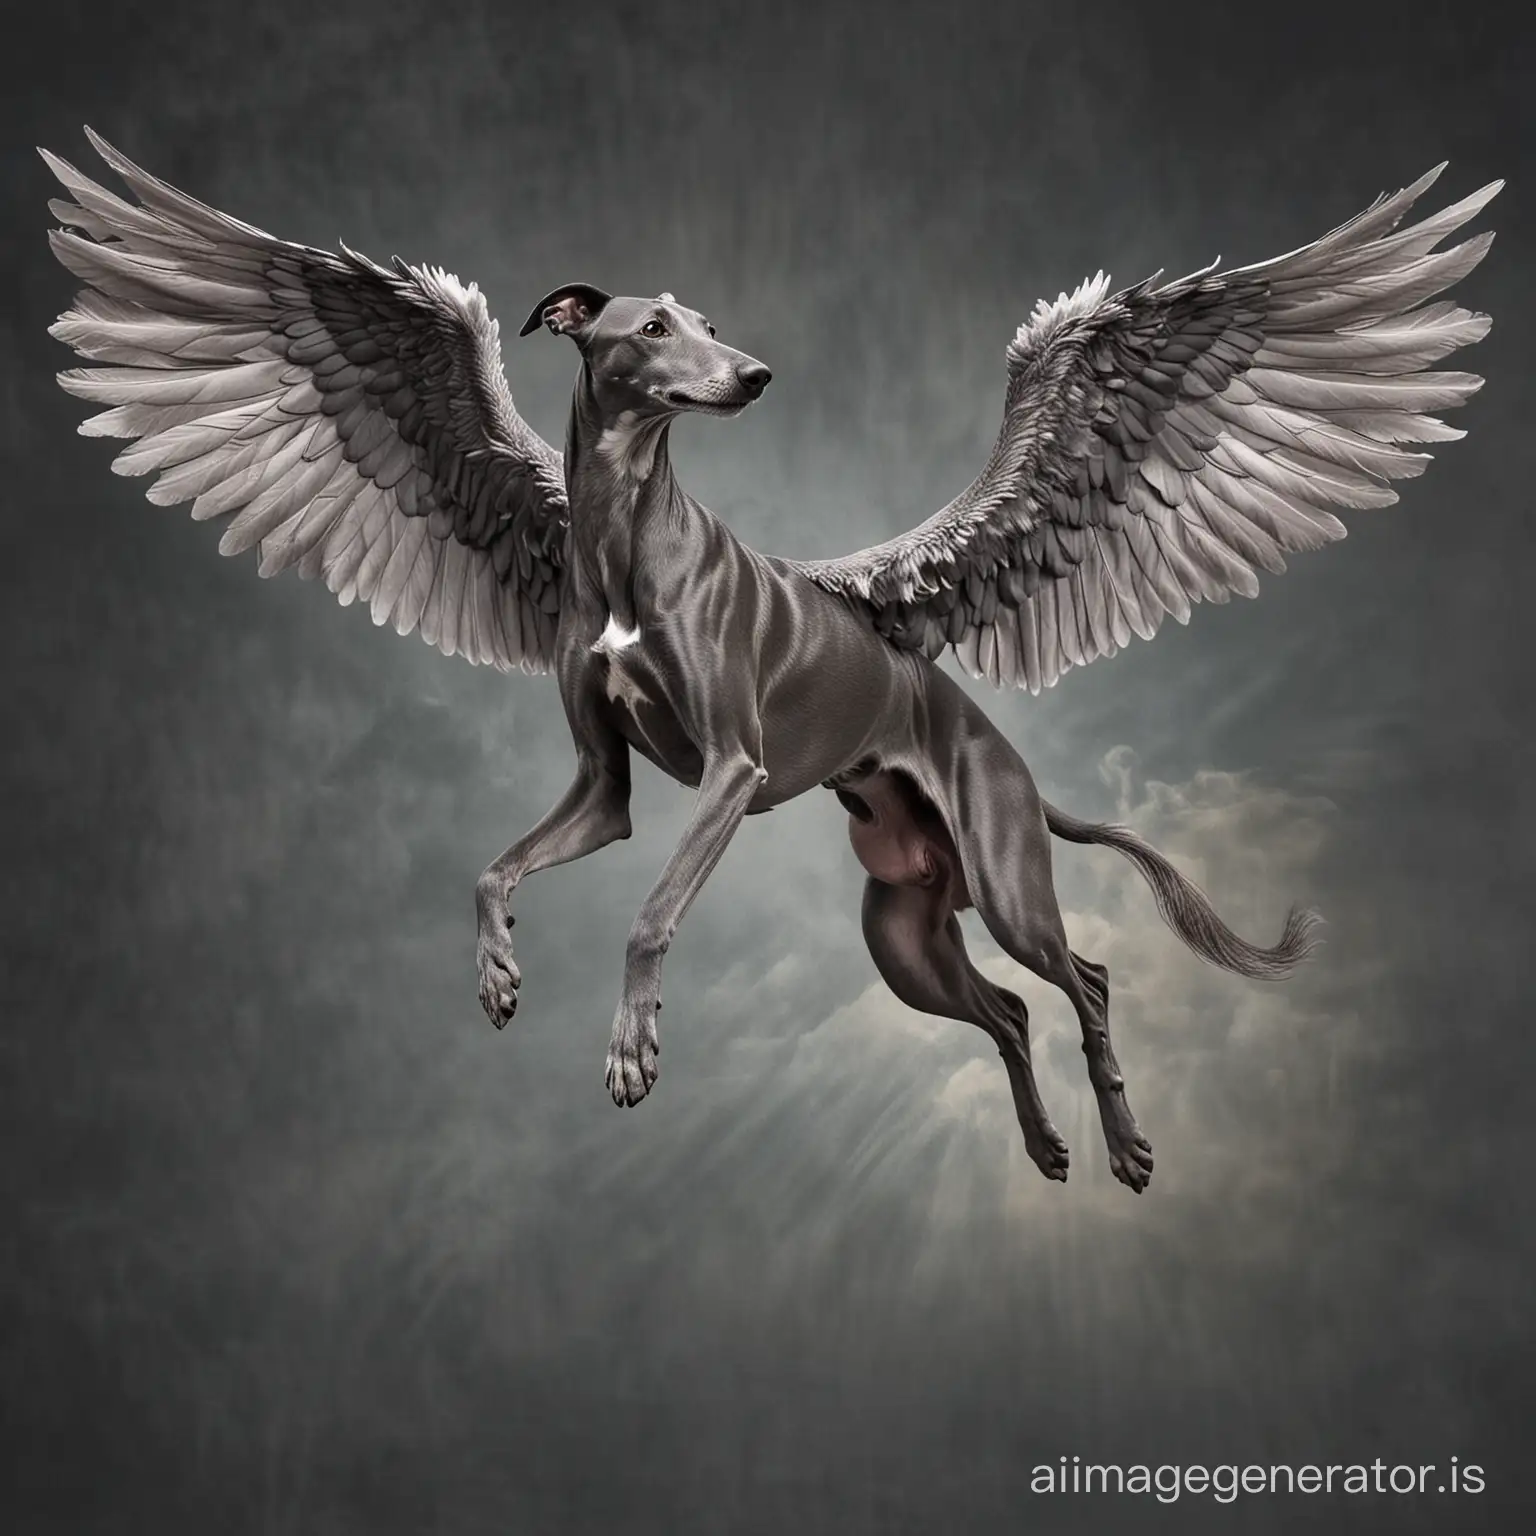 Angelic-Greyhound-in-Flight-with-Majestic-Wings